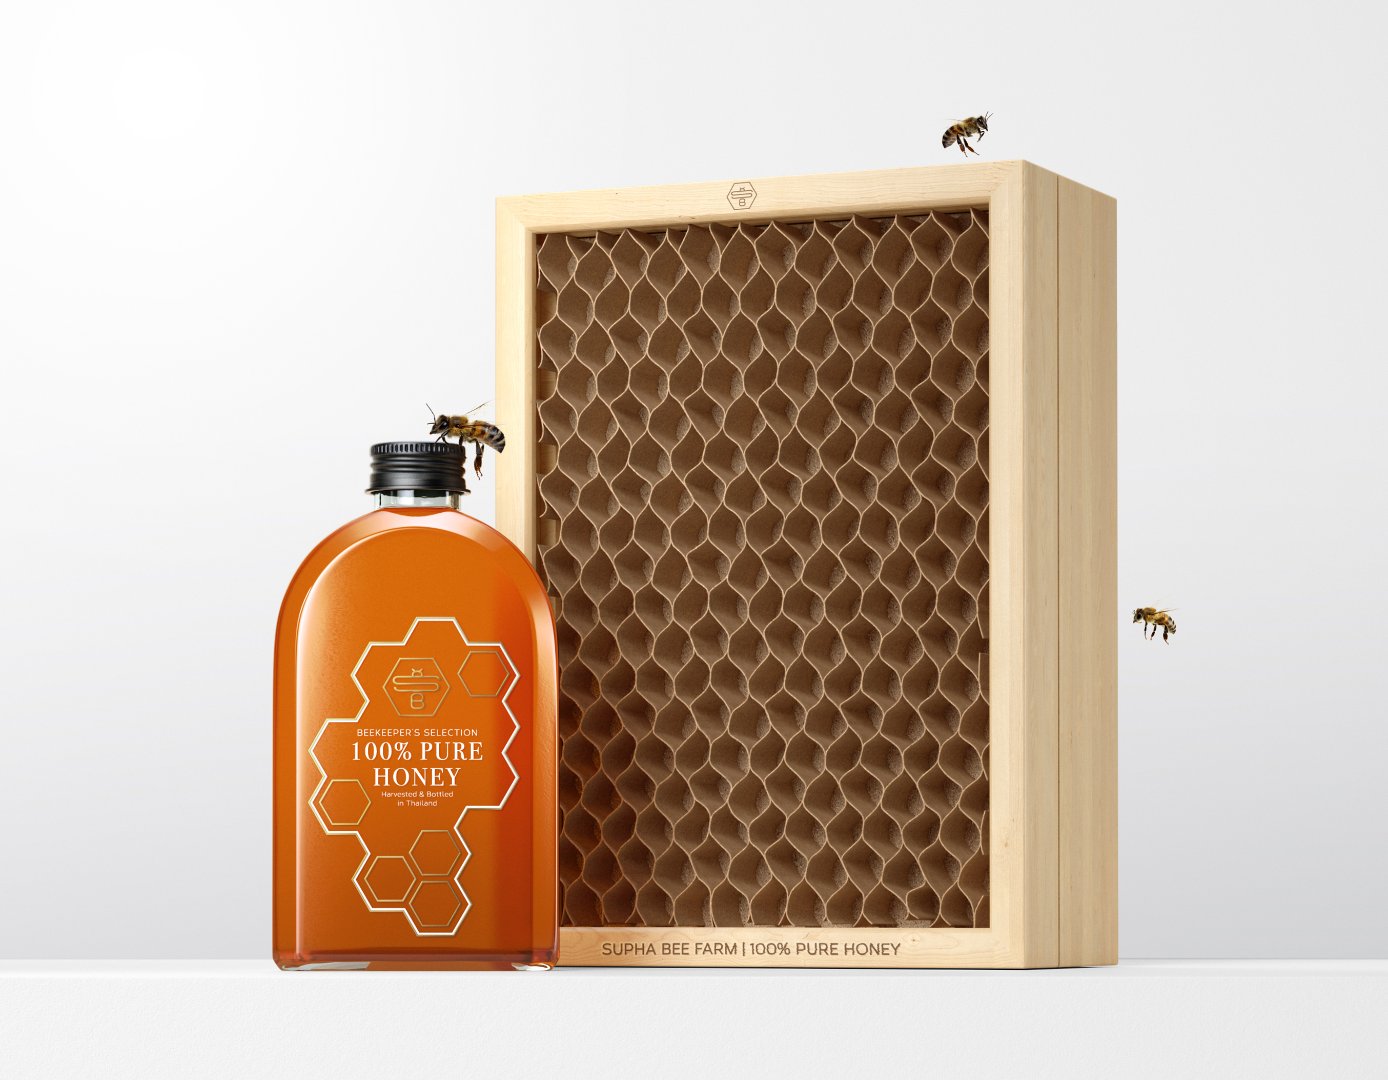 Supha Bee Farm Honey Brings To Life The Honeycomb Bee Process Right Into The Packaging